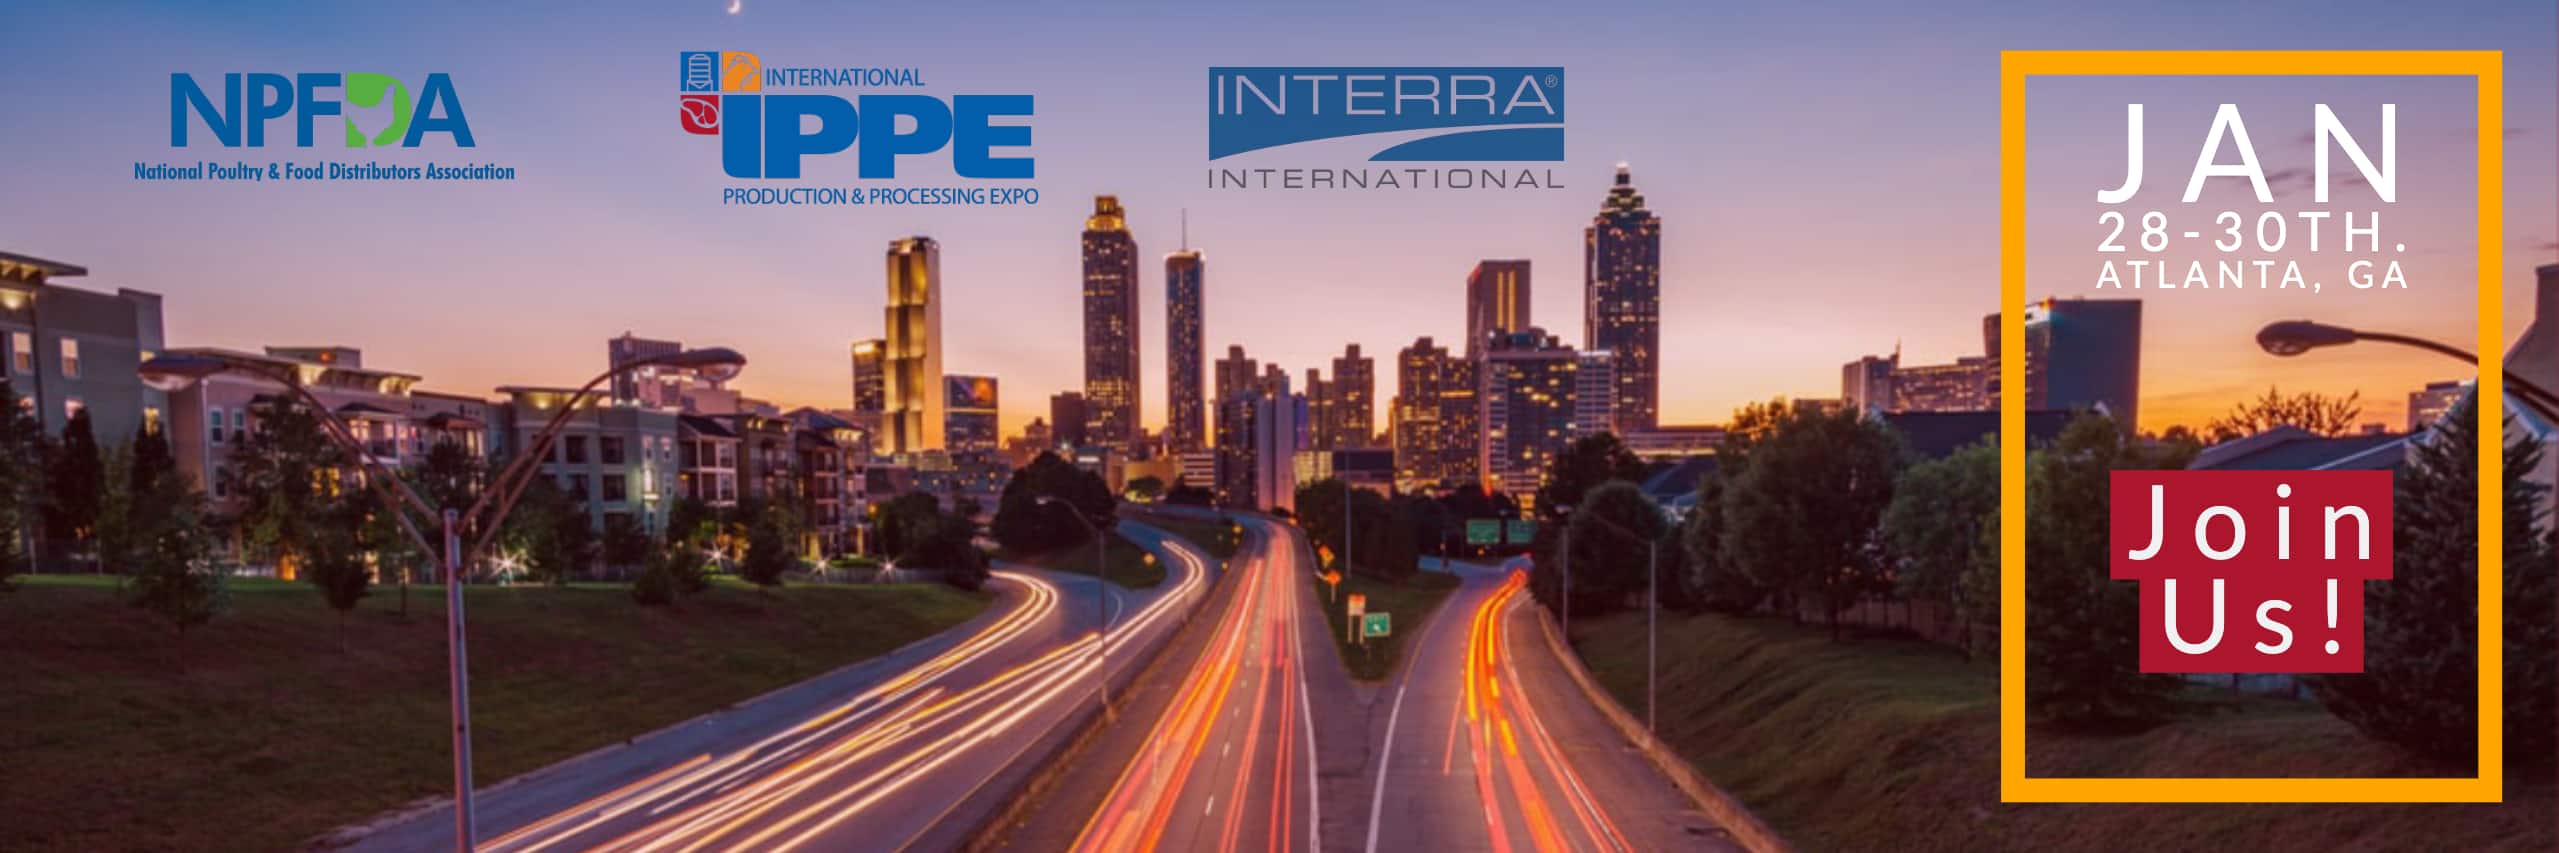 Interra at the IPPE 2020 and NPFDA